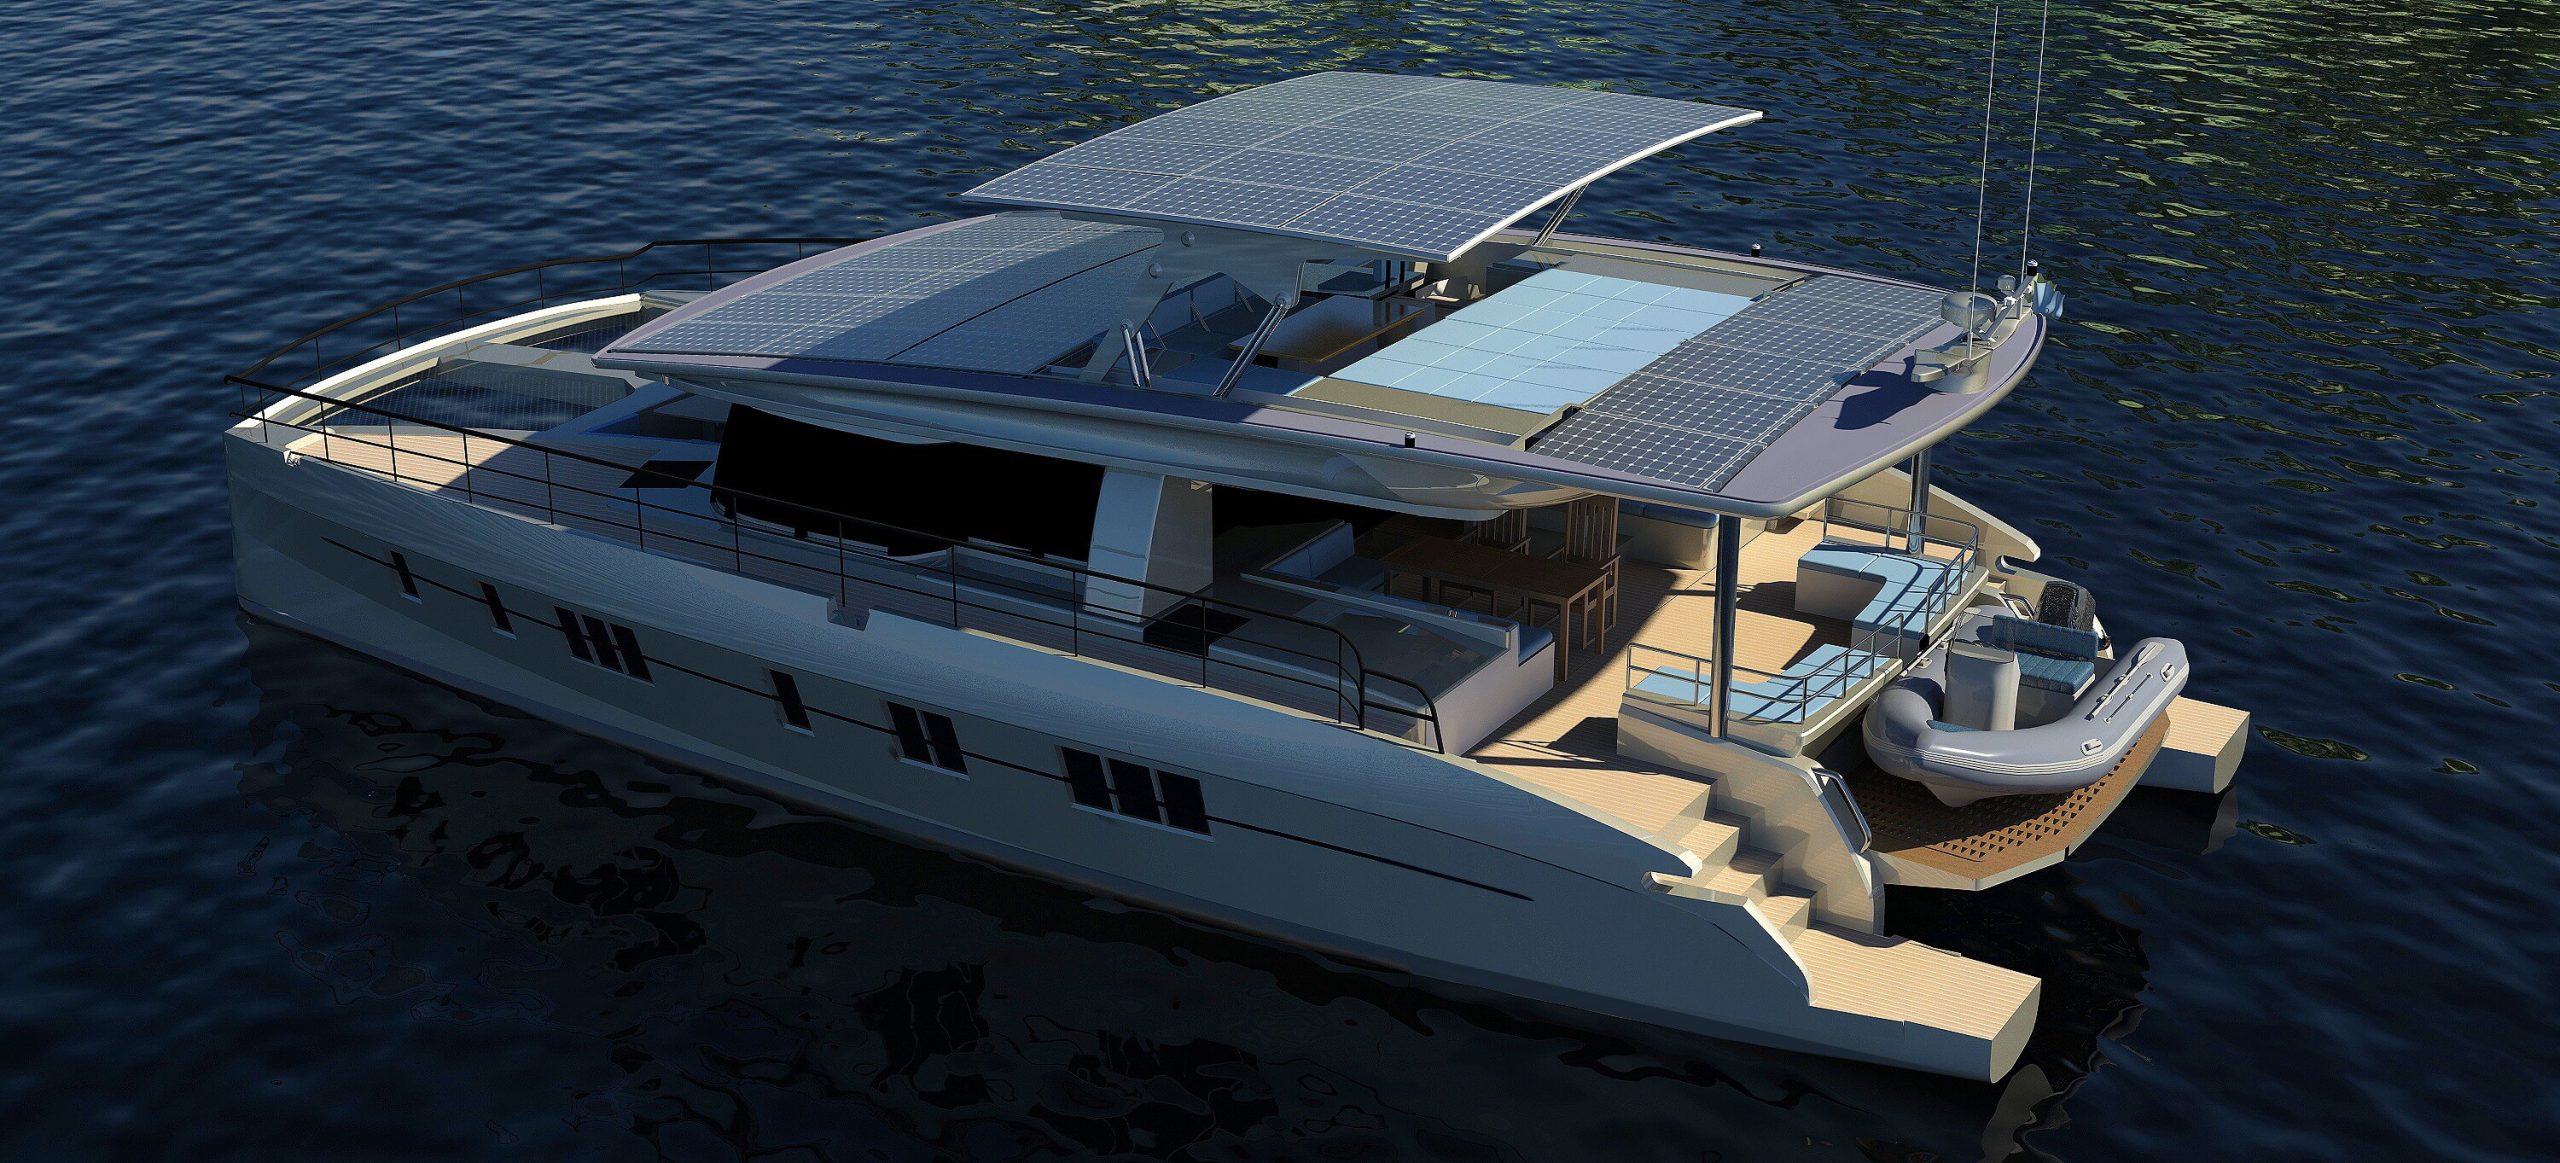 Serenity Yachts - Solmate